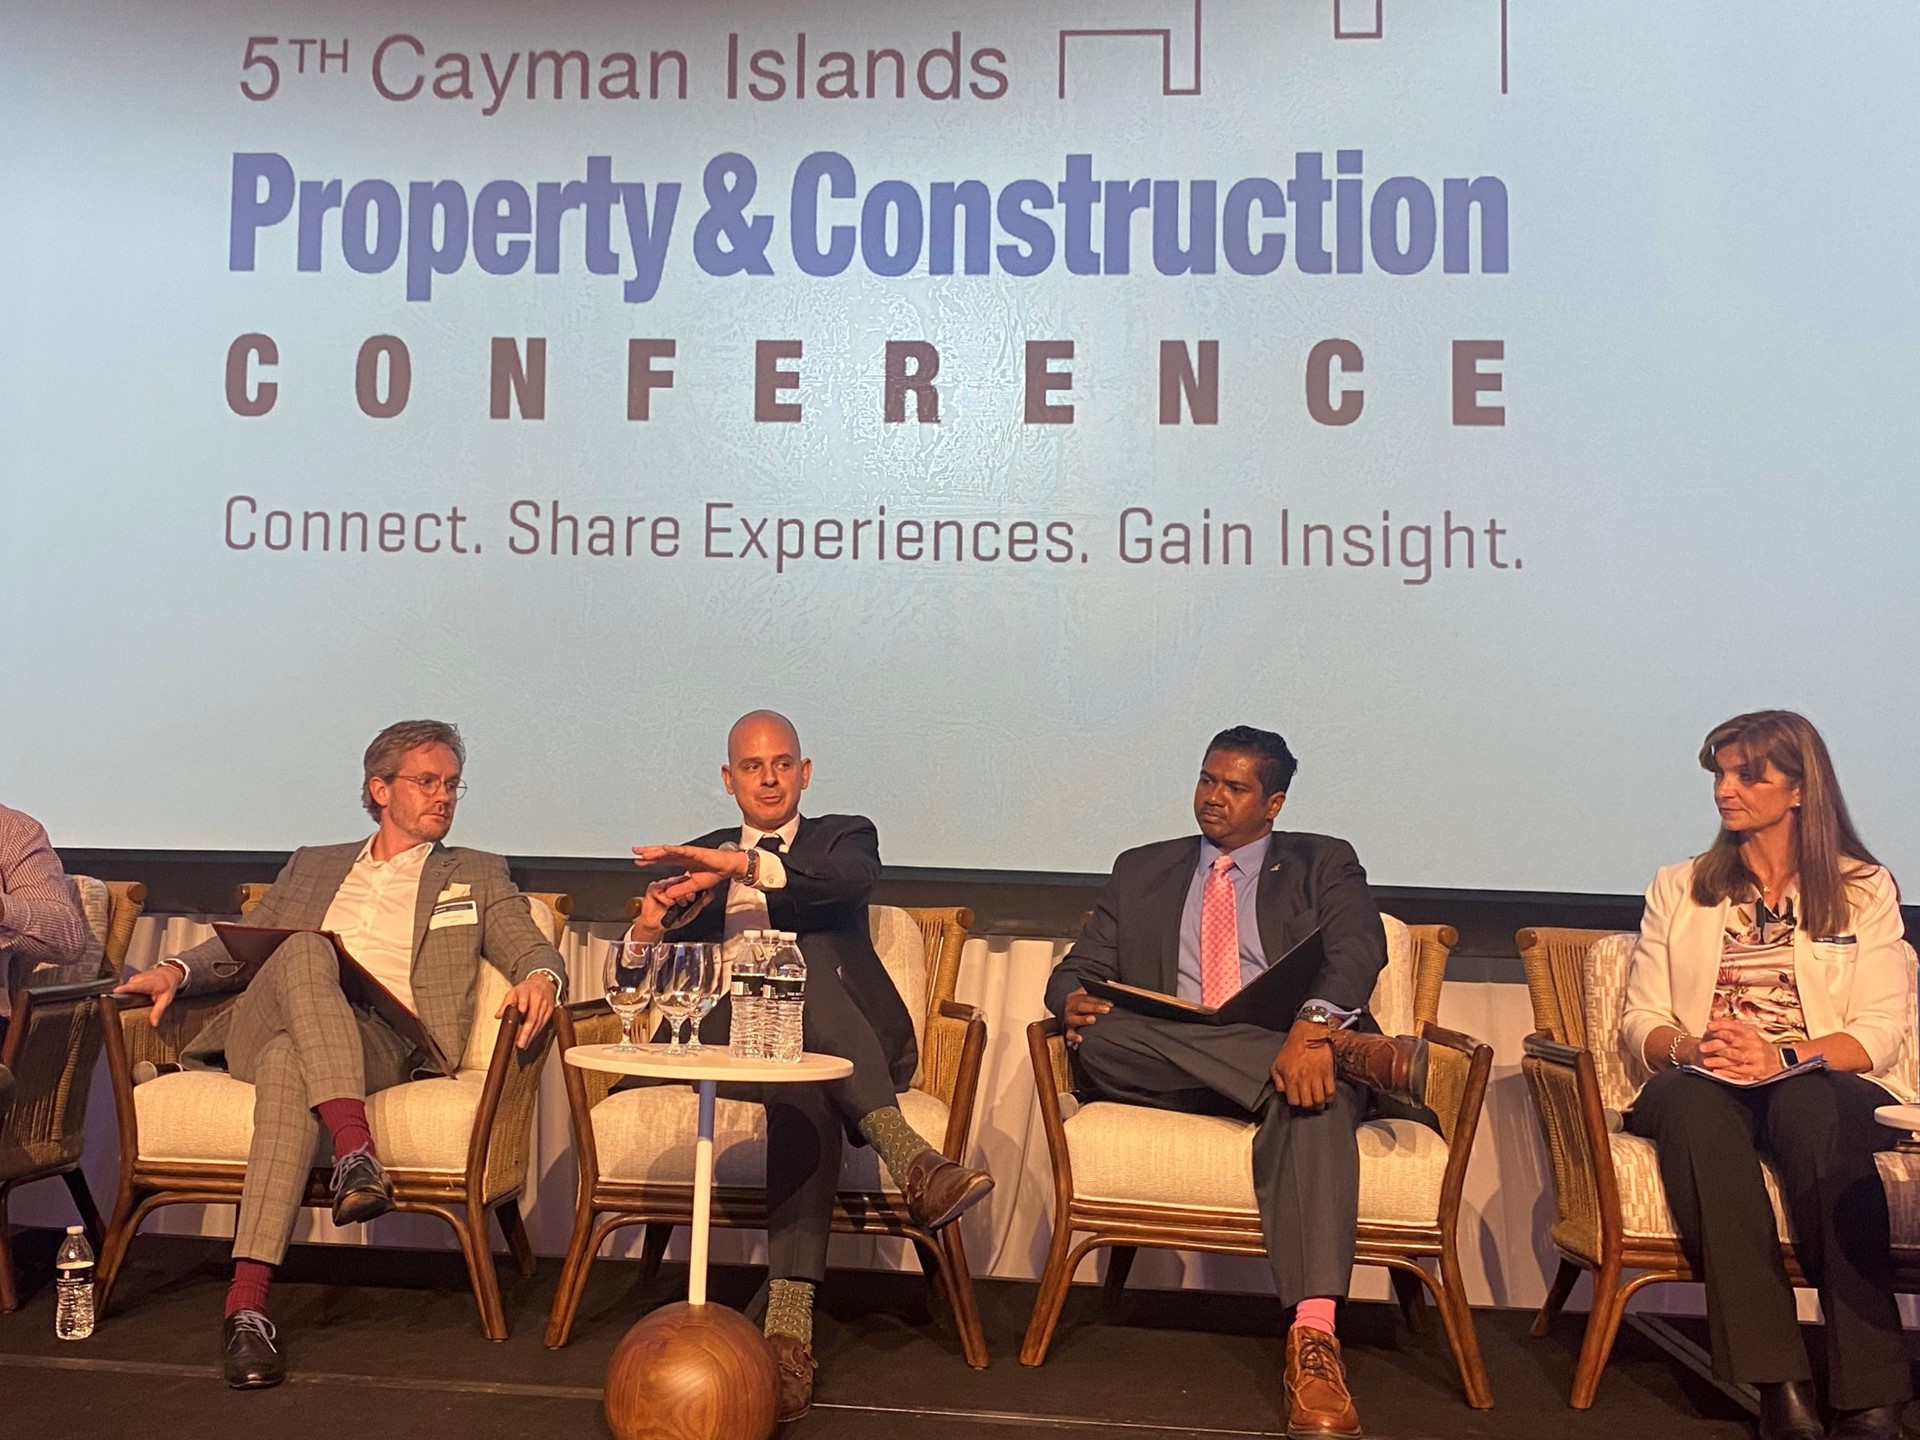 Cayman's post-COVID outlook: Cayman remains strong despite rising interest rates and global supply chain issues